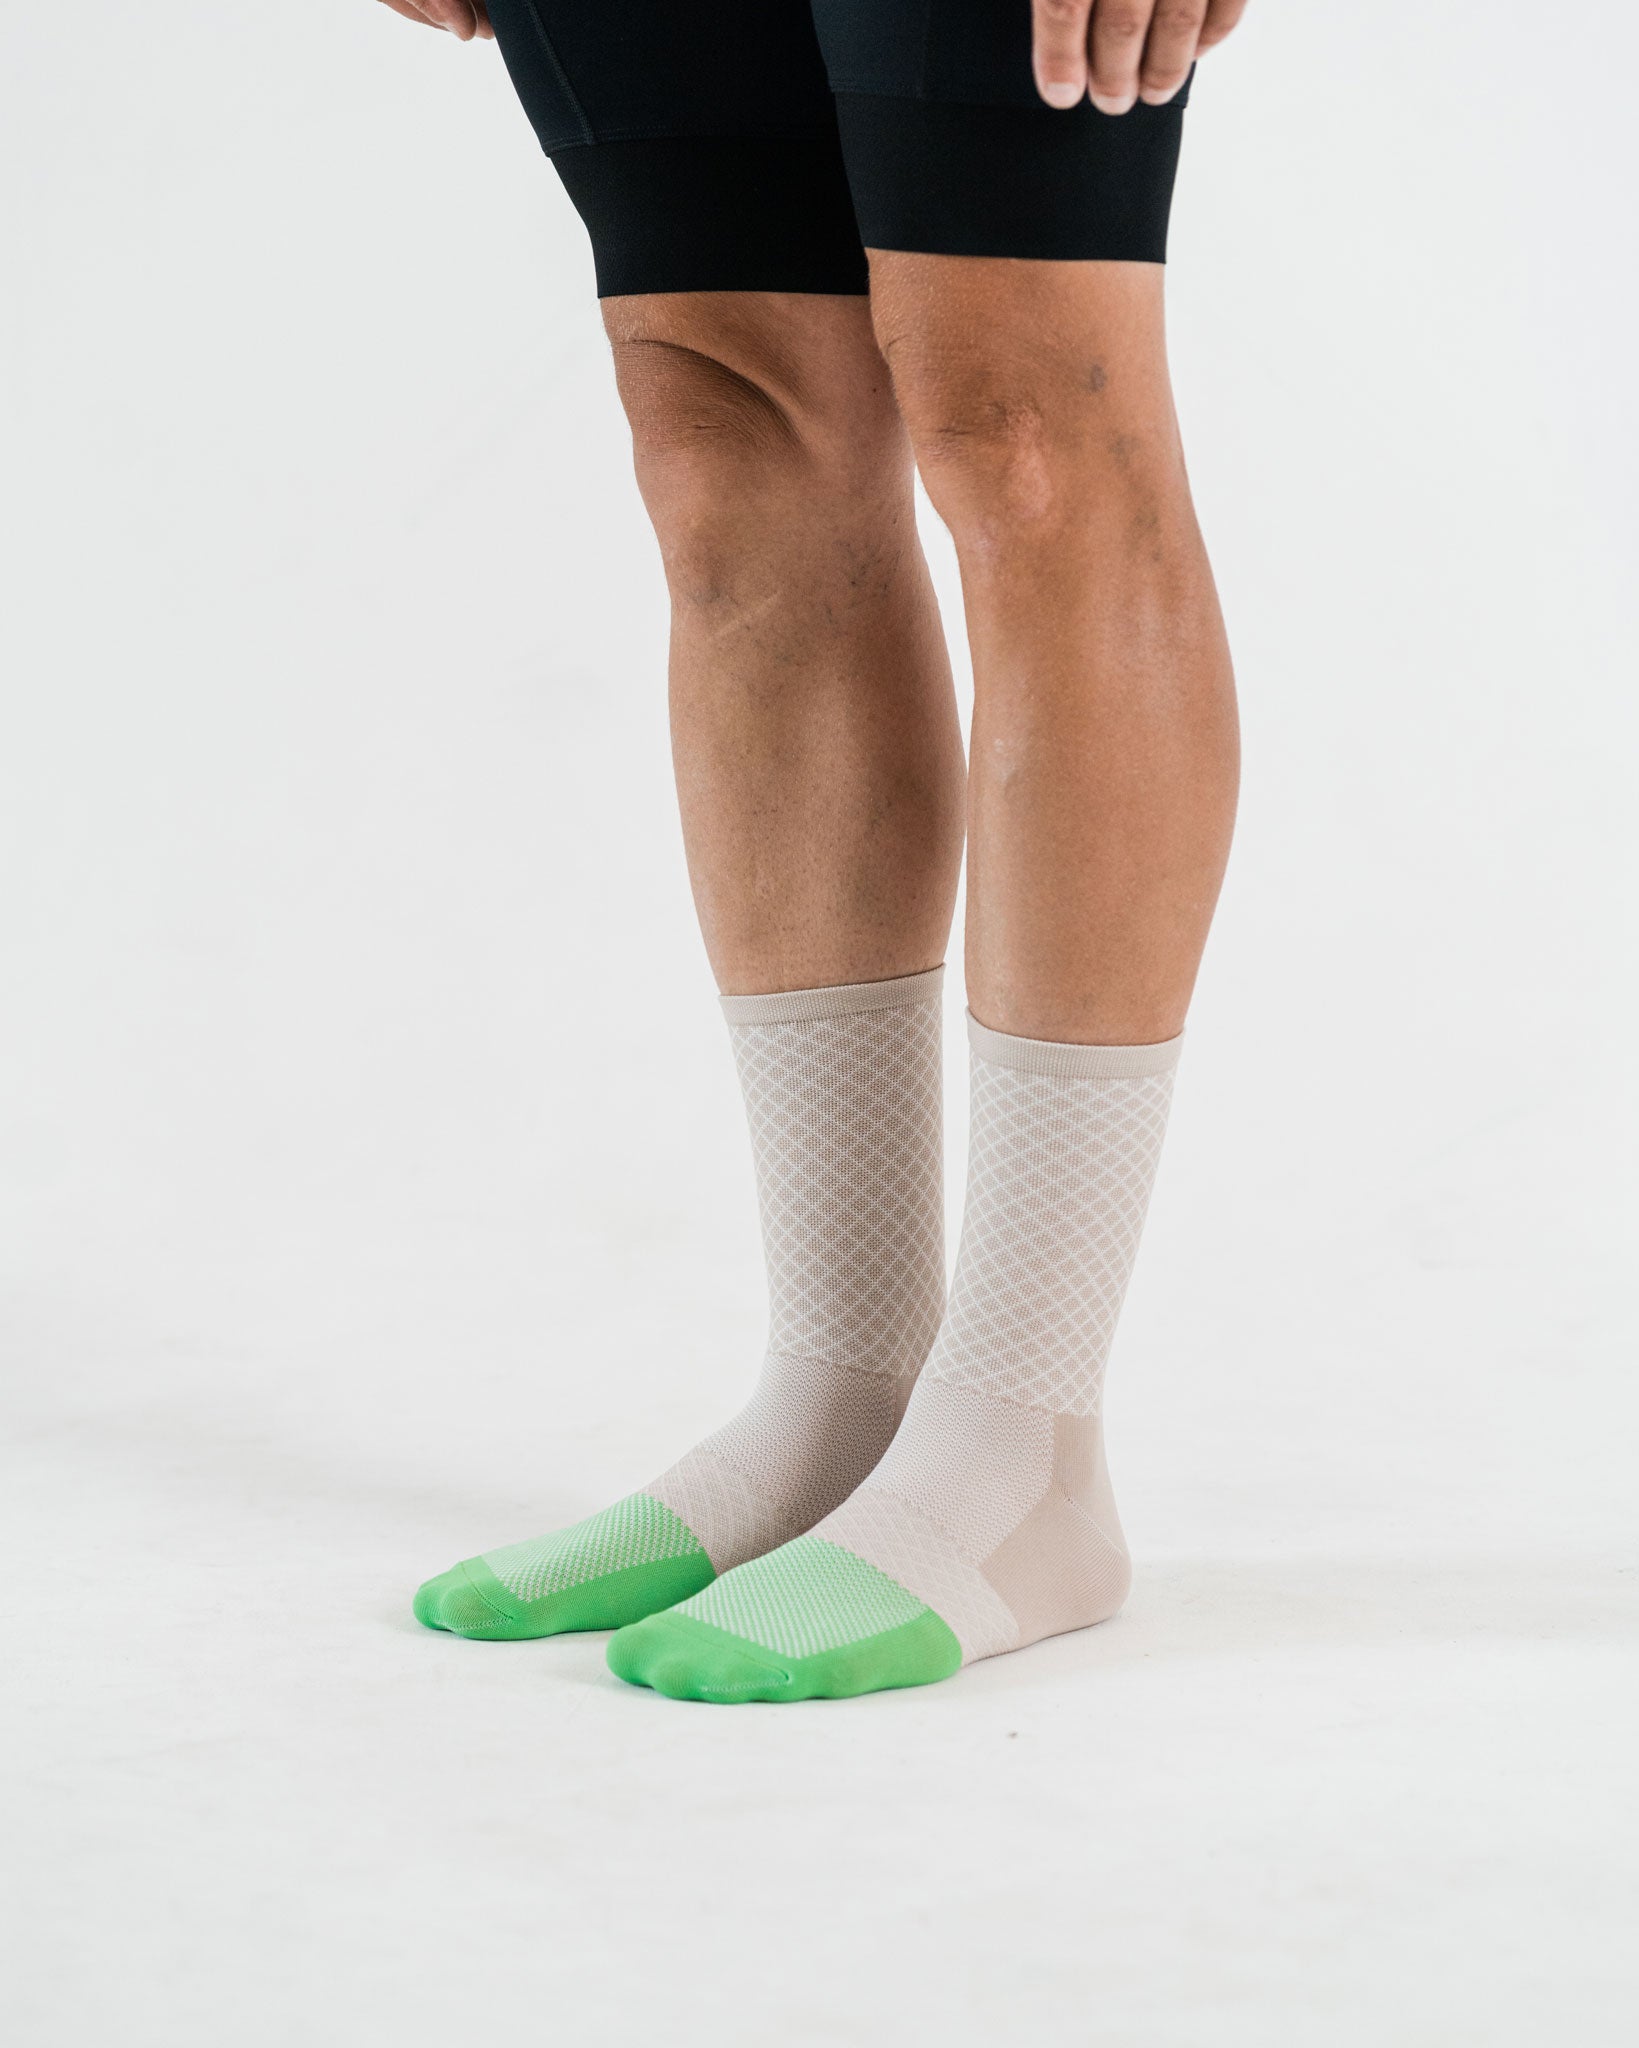 beige cycling socks for men with green toebox and diamong shape pattern